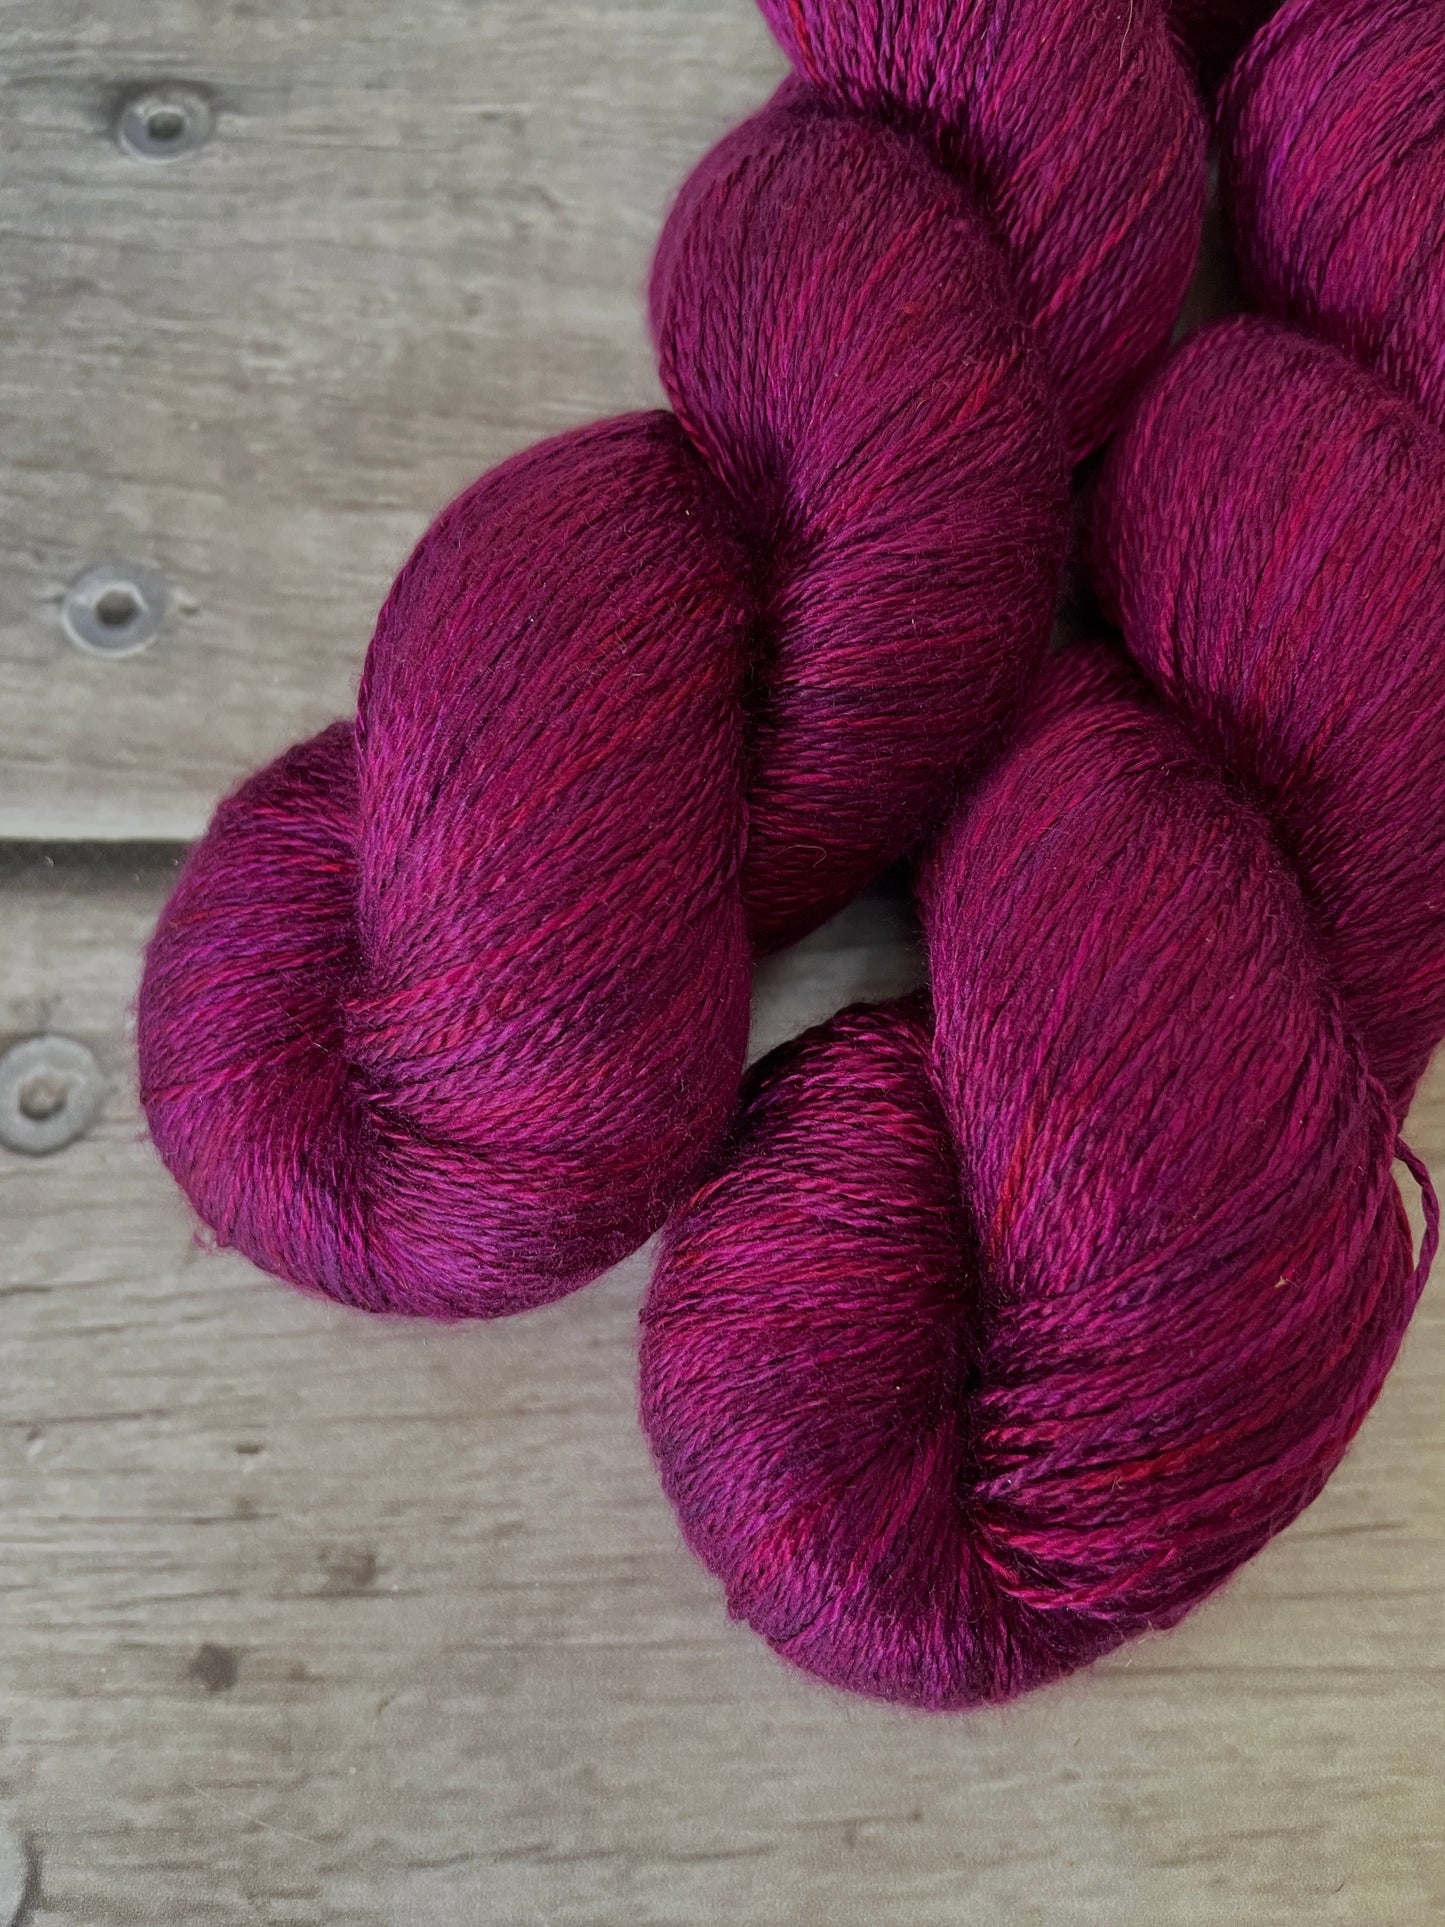 Wild Orchid - 3 ply in Mulberry silk - Pekoe hl